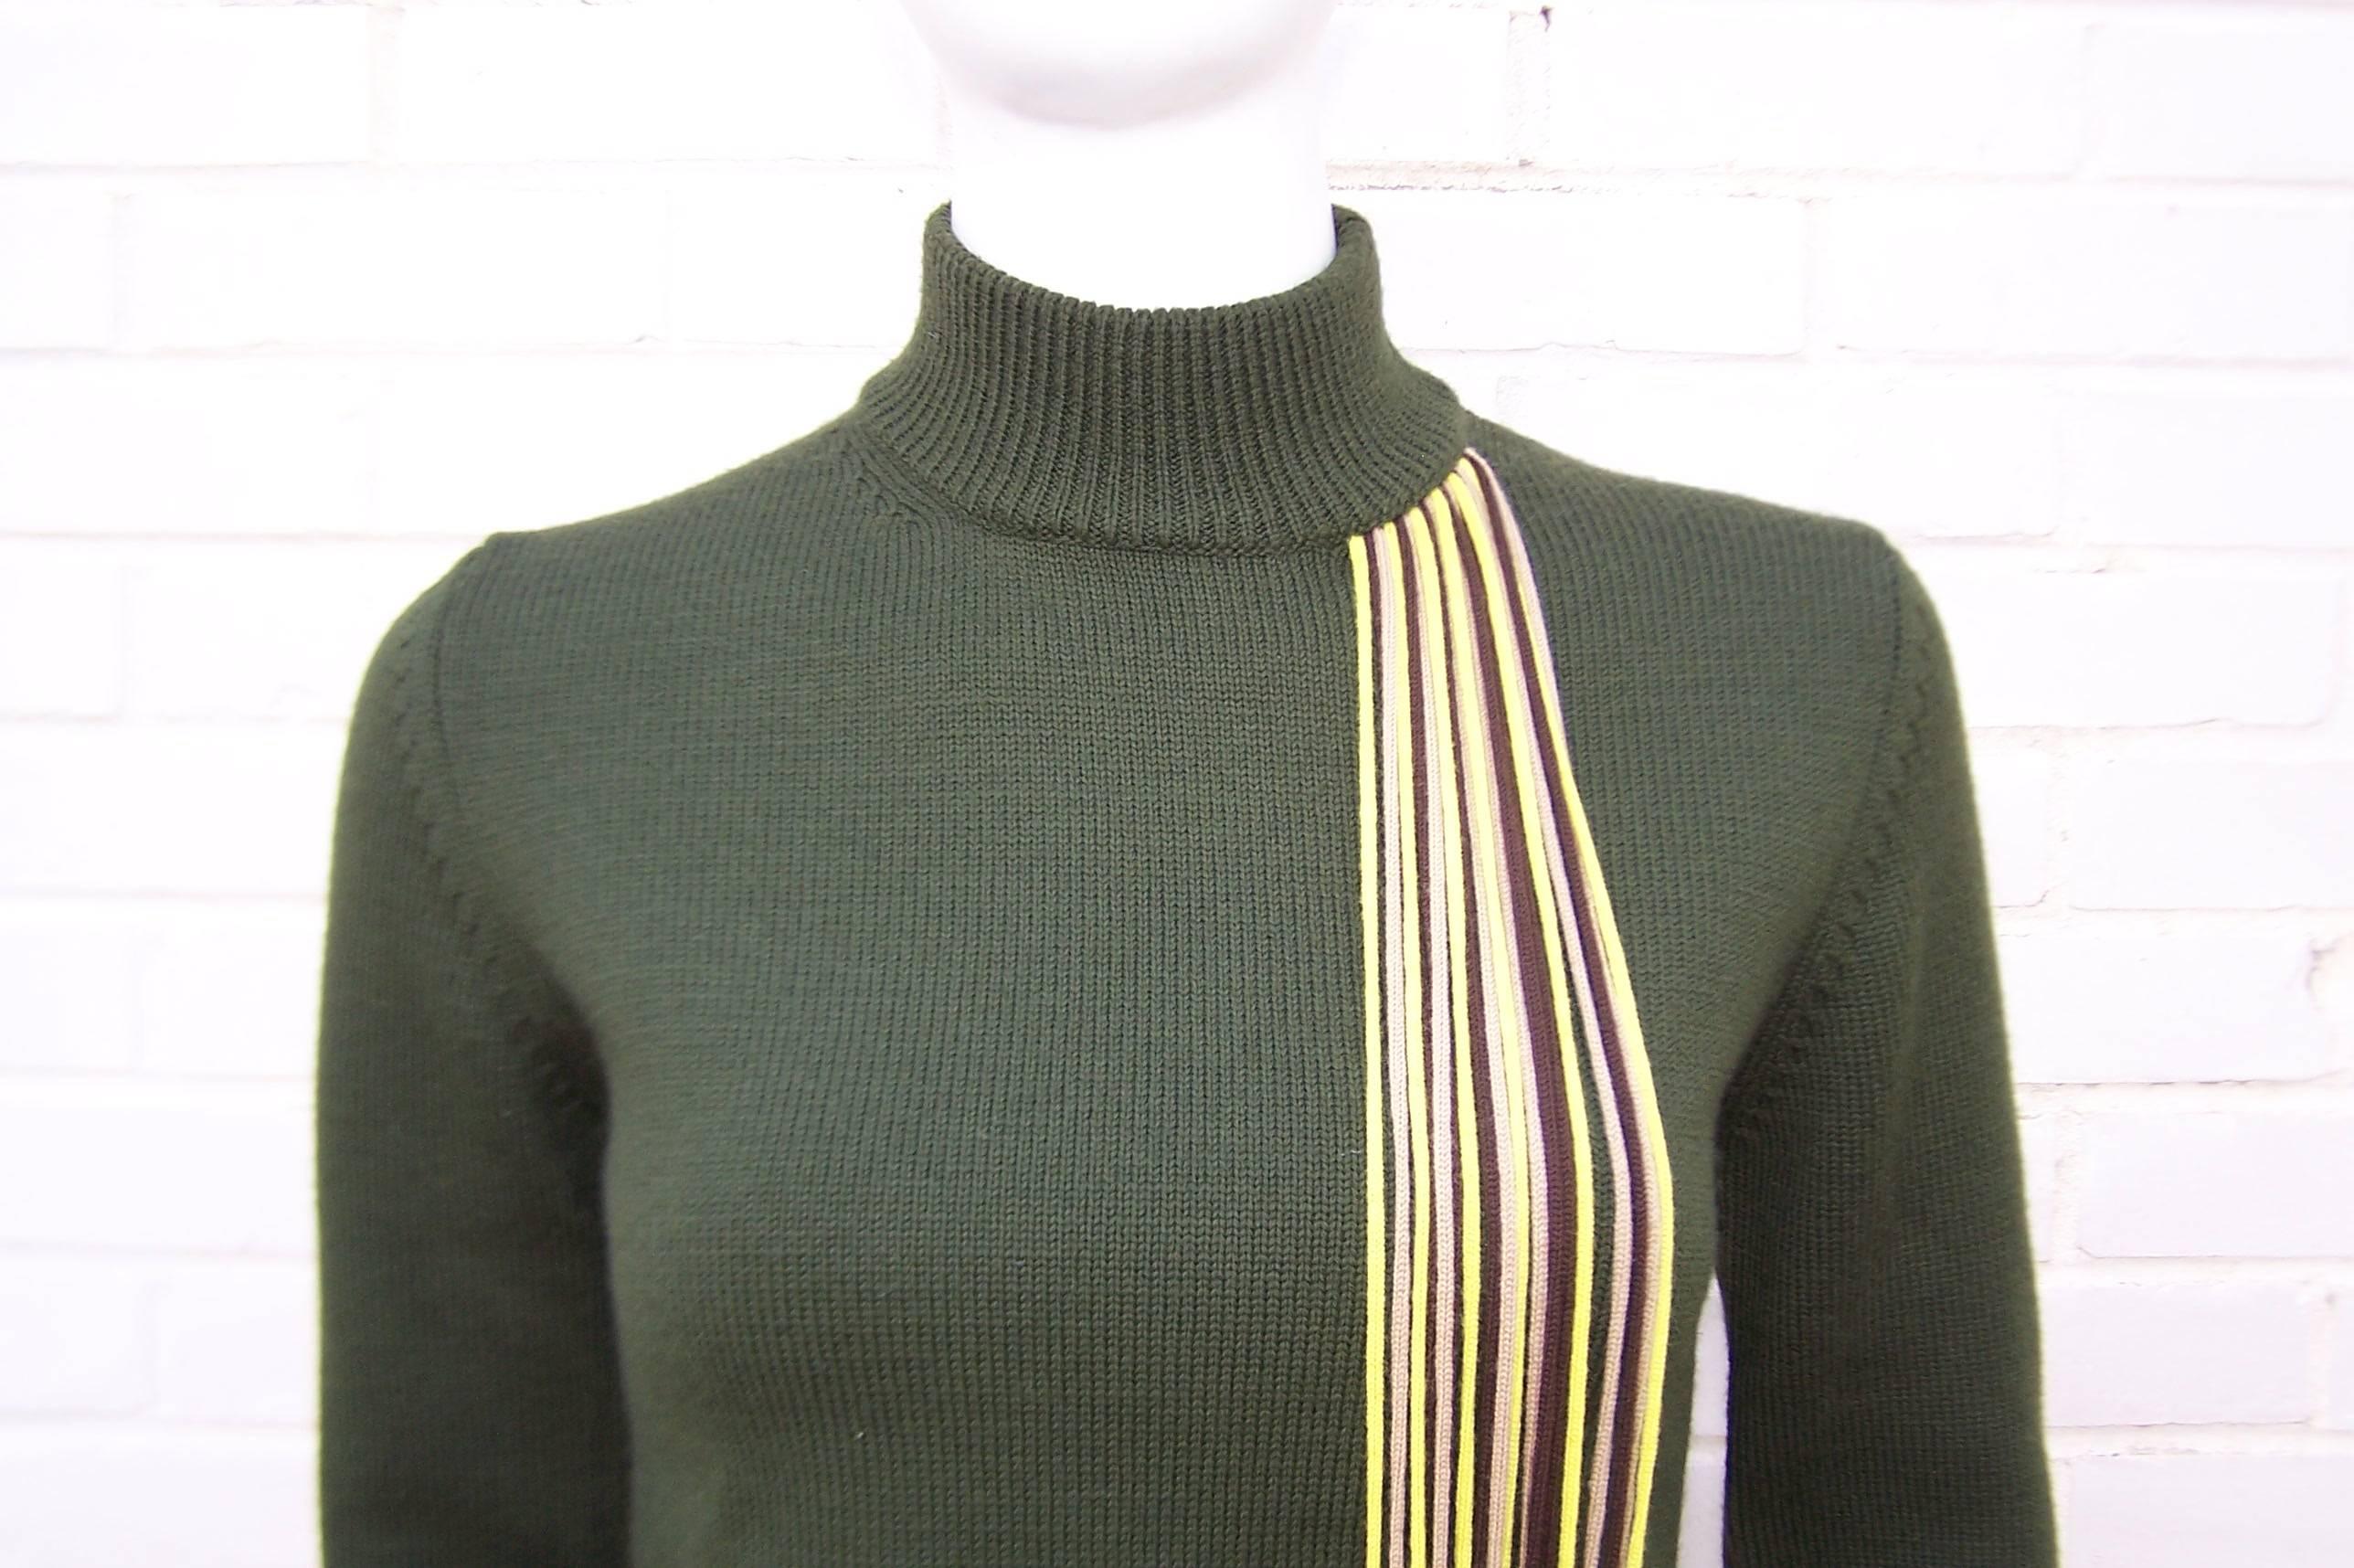 C.1990 Byblos Army Green Turtleneck Sweater With Op Art Yarn Details 1